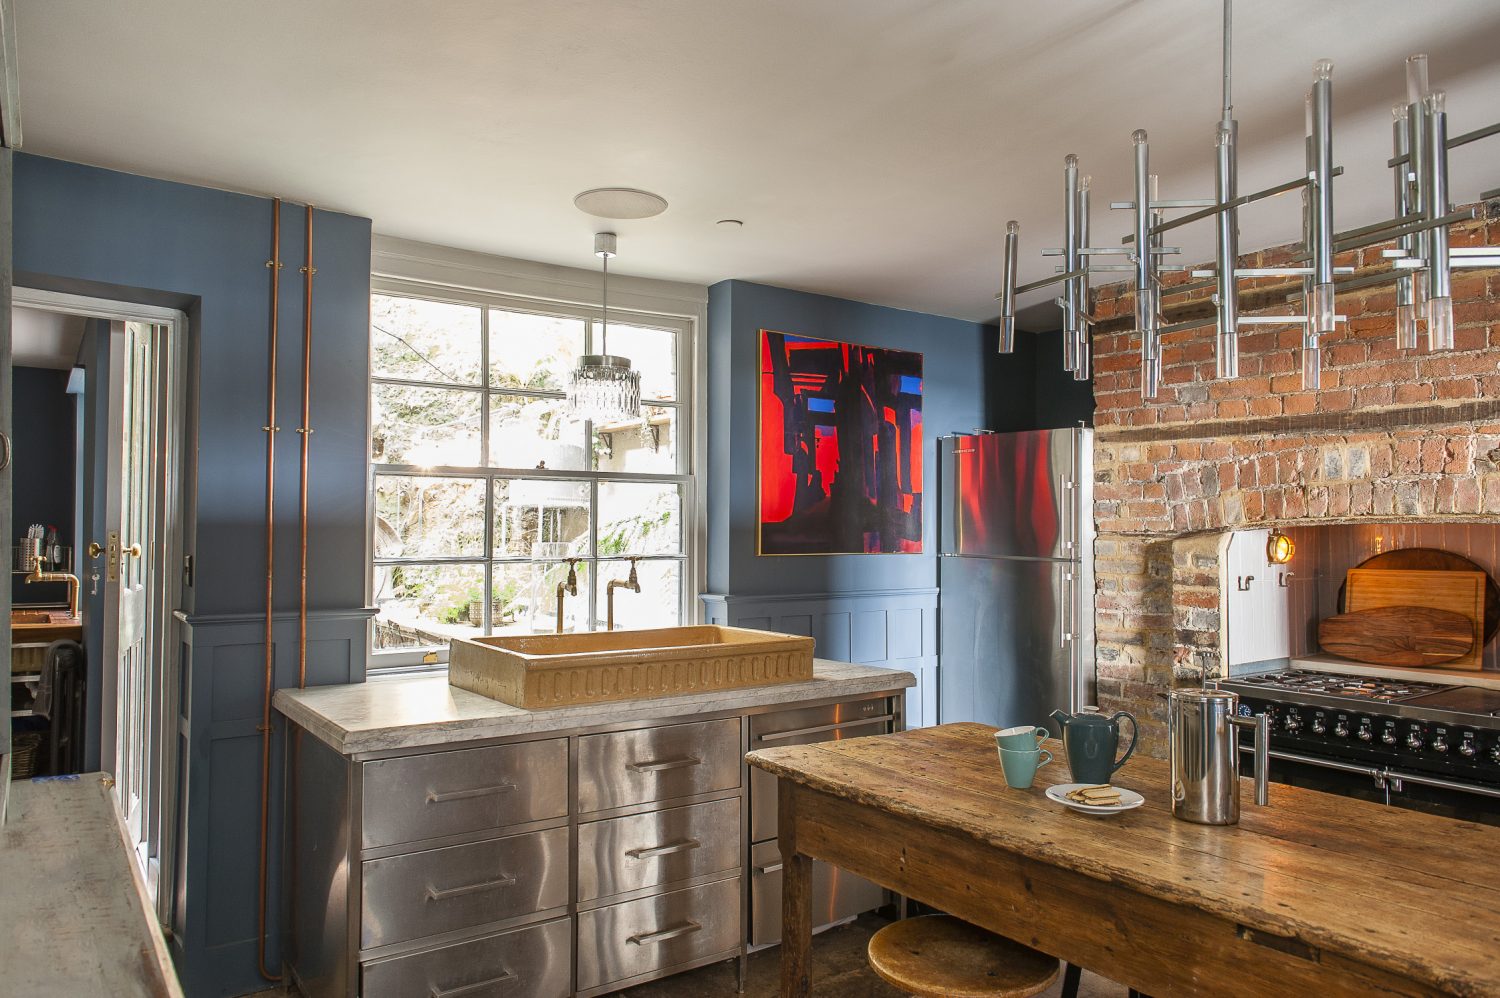 At the heart of the kitchen are a marble-topped stainless steel unit that Shaun had made to house the old stone sink and an 18th century oak refectory table